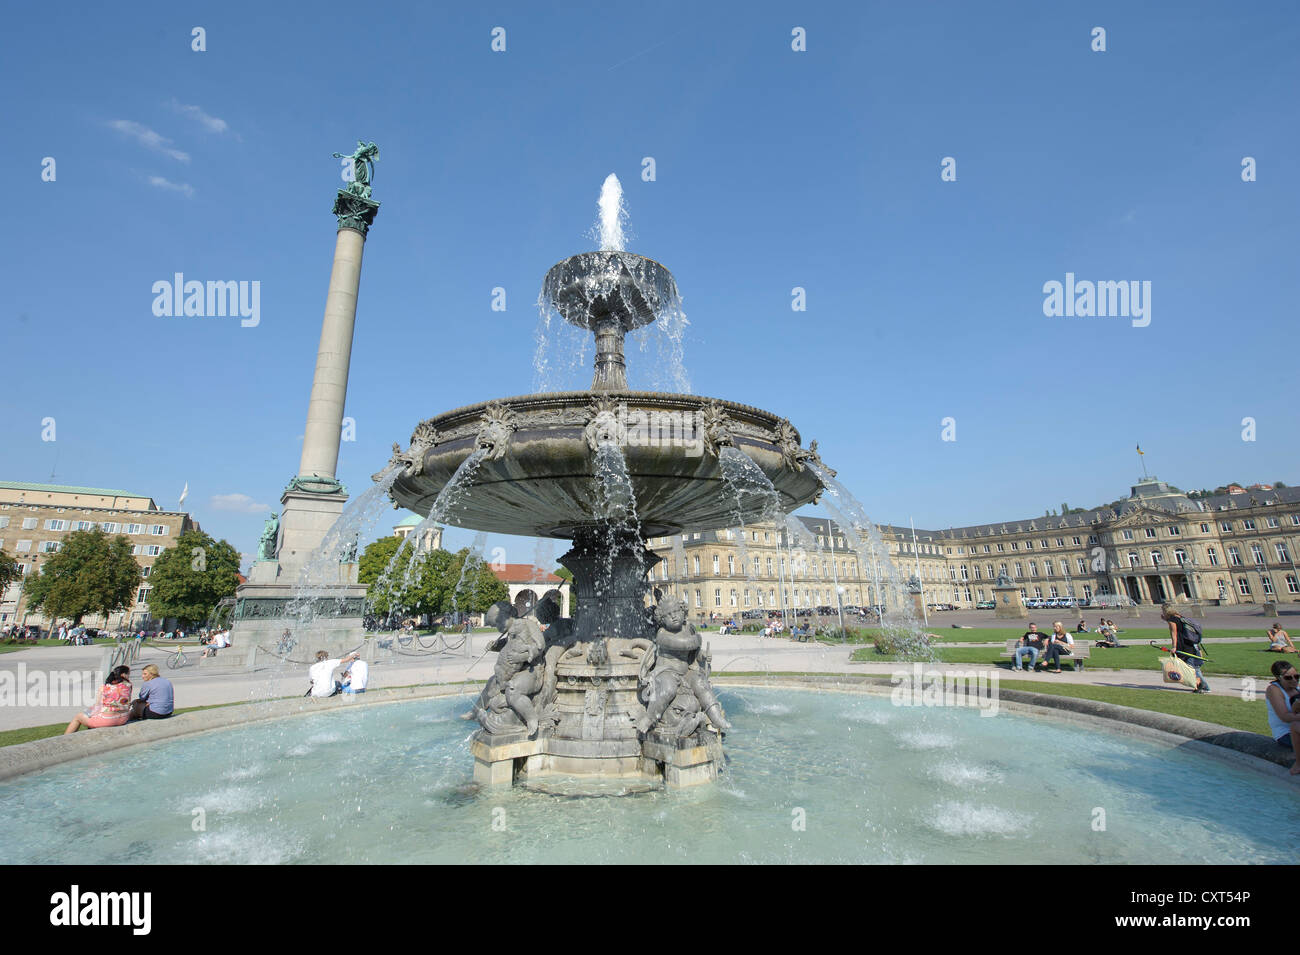 Schlossplatz square with a fountain and the 30-meter high Jubilaeumssaeule column, with a statue of the goddess Concordia Stock Photo